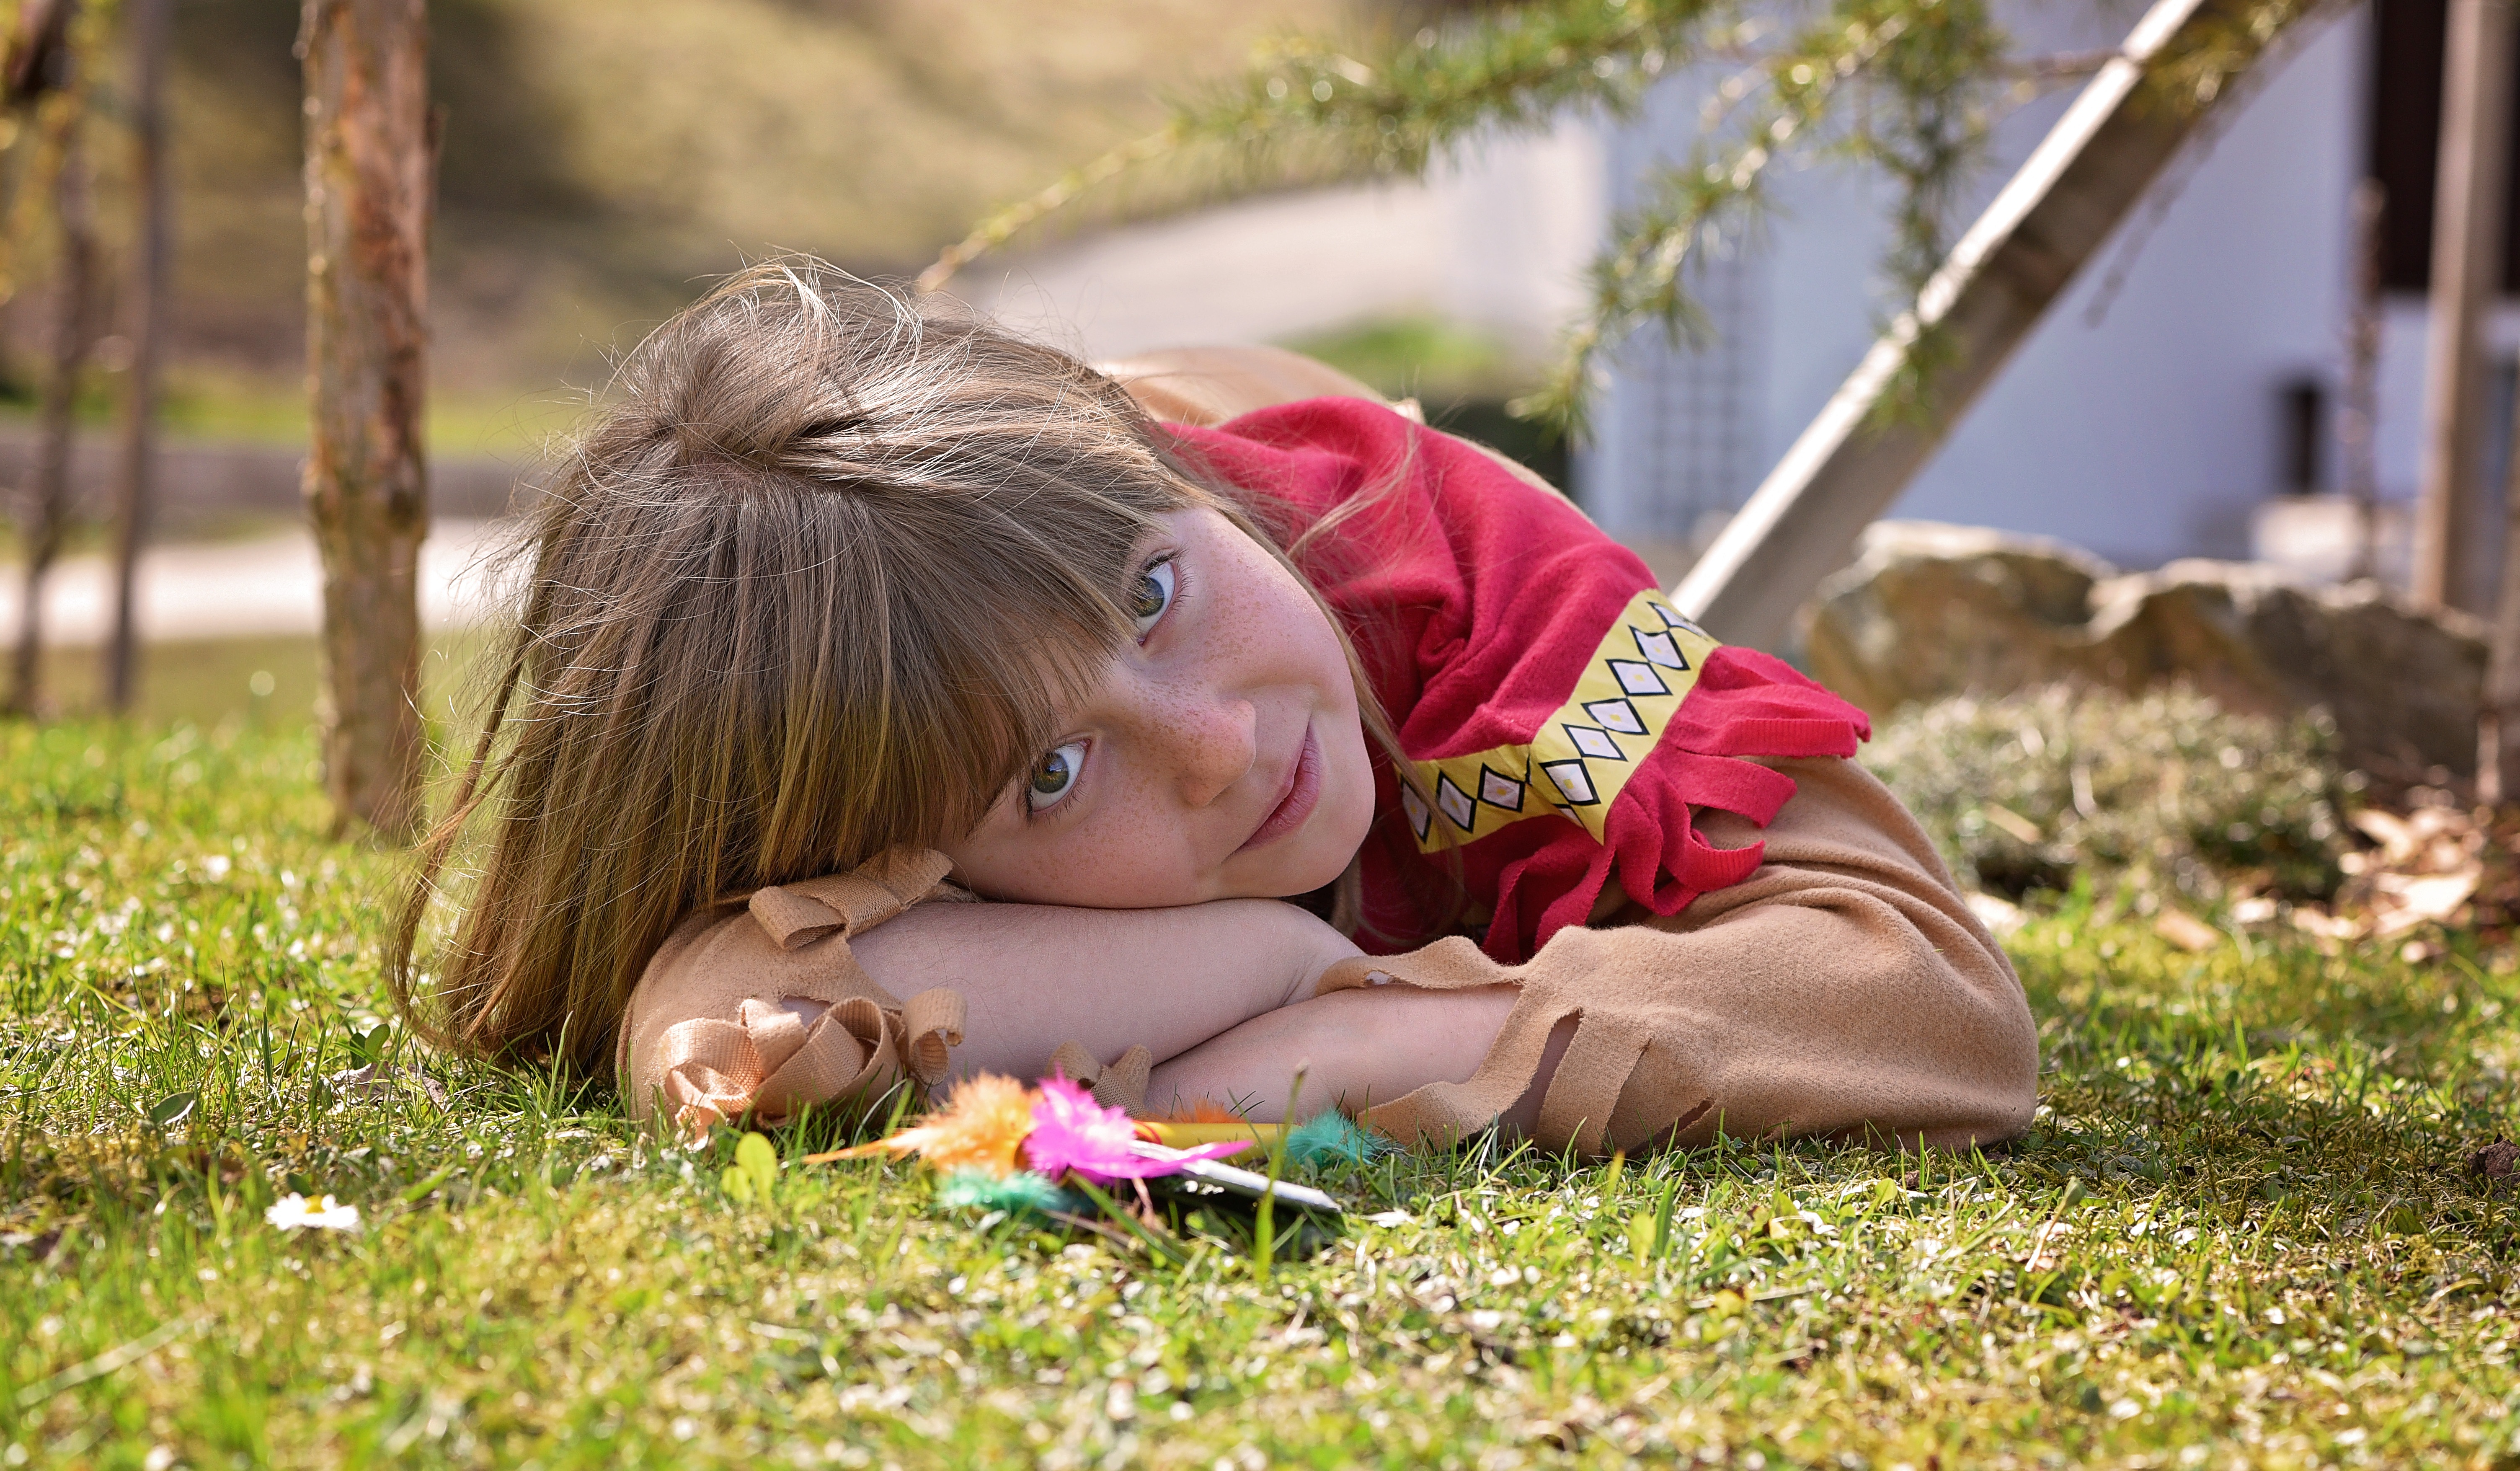 Free high resolution images on the ground, activity, children, cute, cutene...